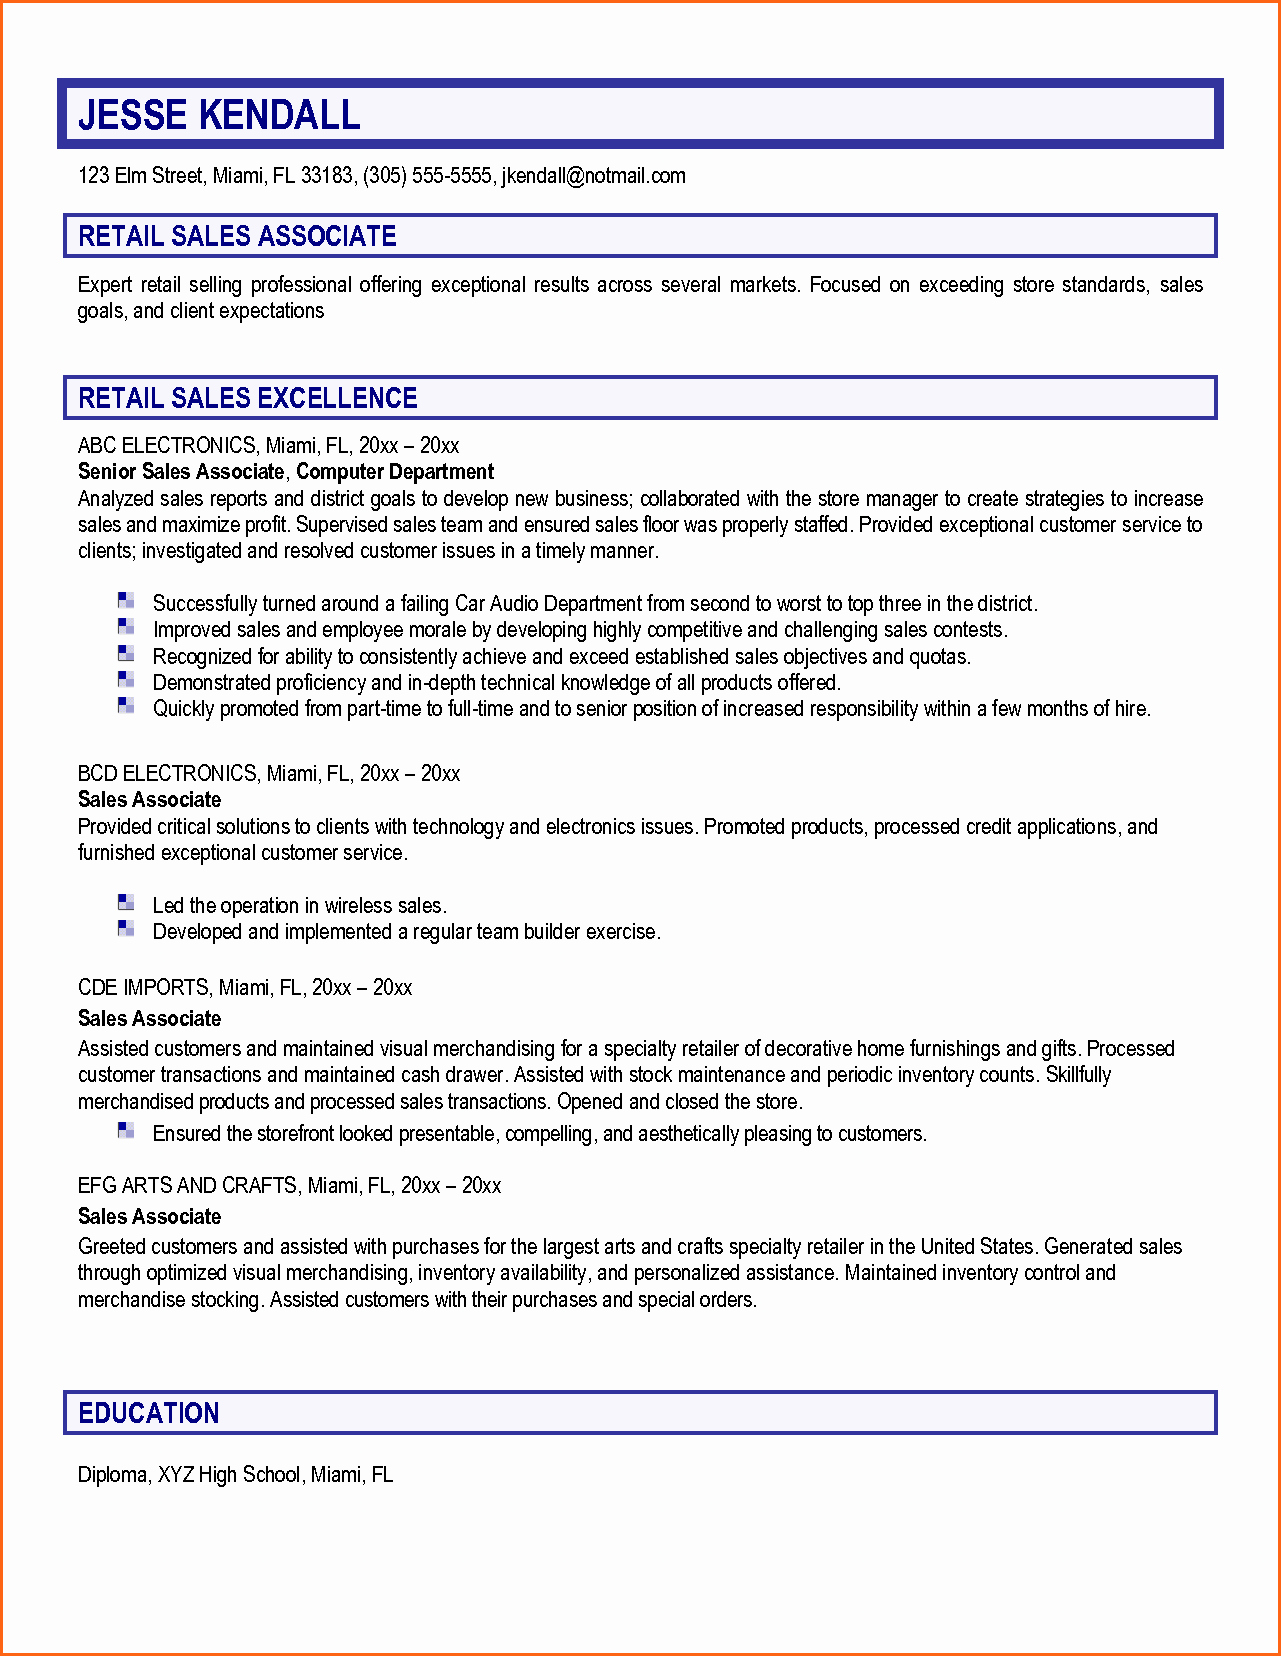 Functional Resume Sales associate Career Objective for